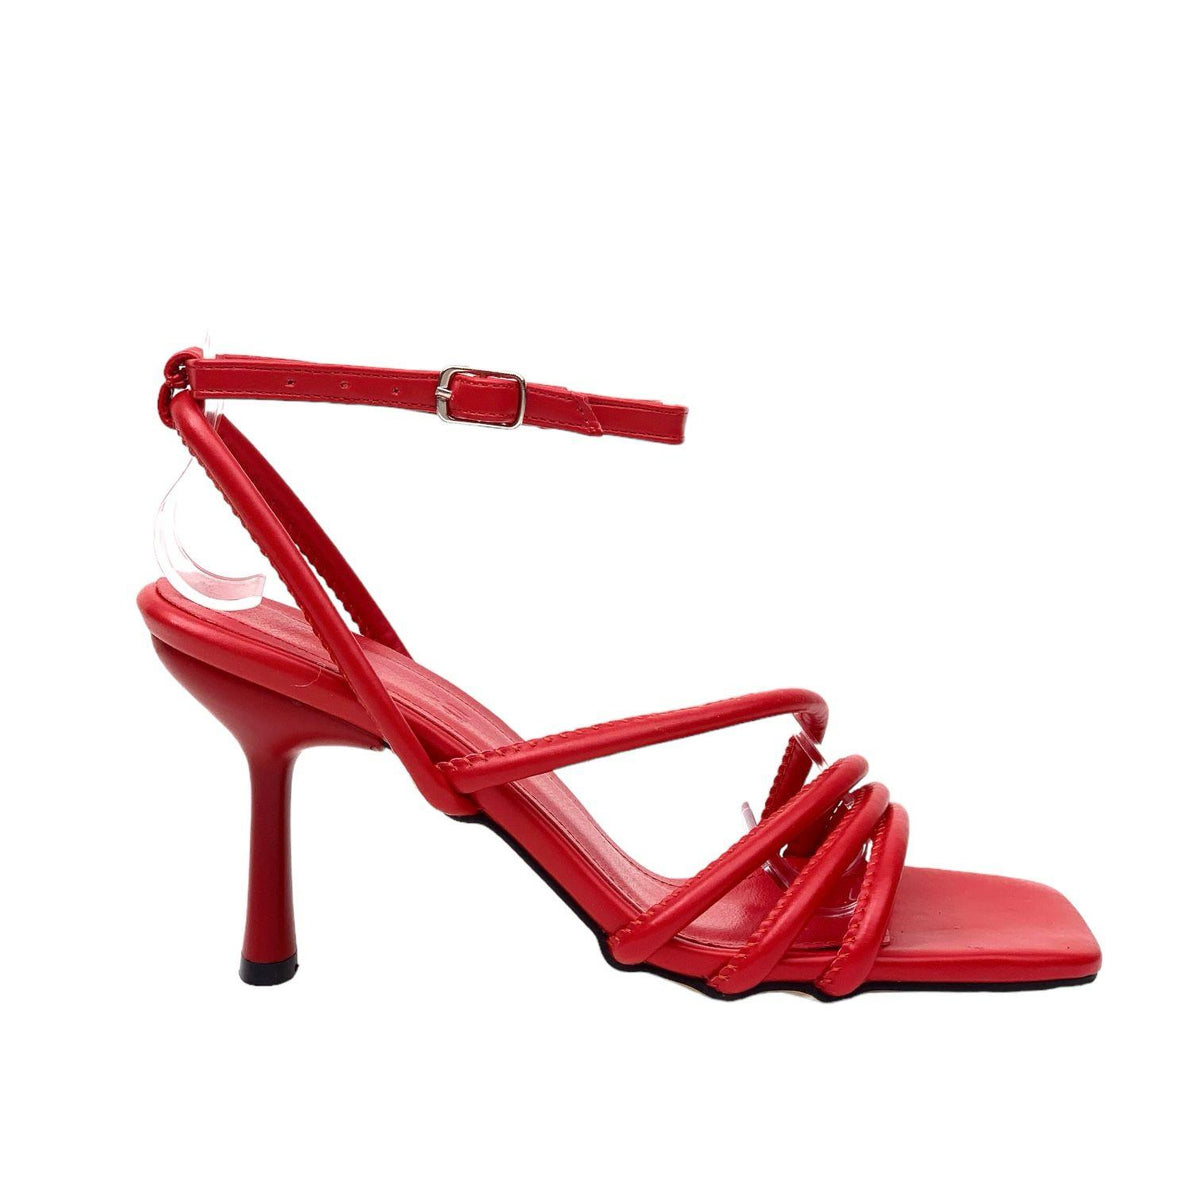 Women's Pakj Red Ankle Strap Sandals 7.5 Cm - STREETMODE™